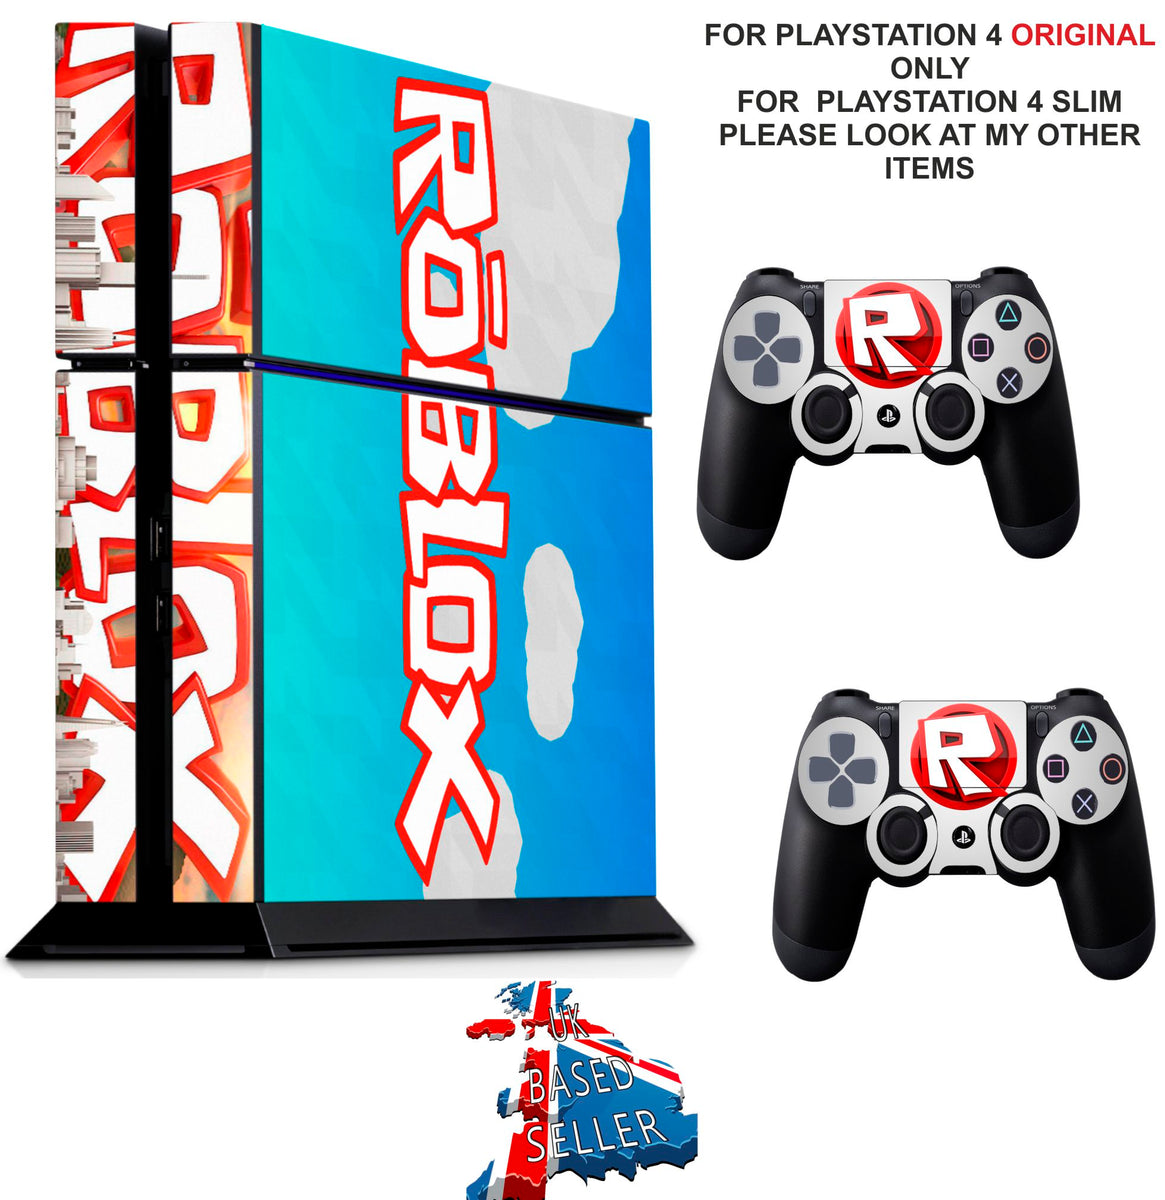 Can You Play Roblox On Ps4 Slim